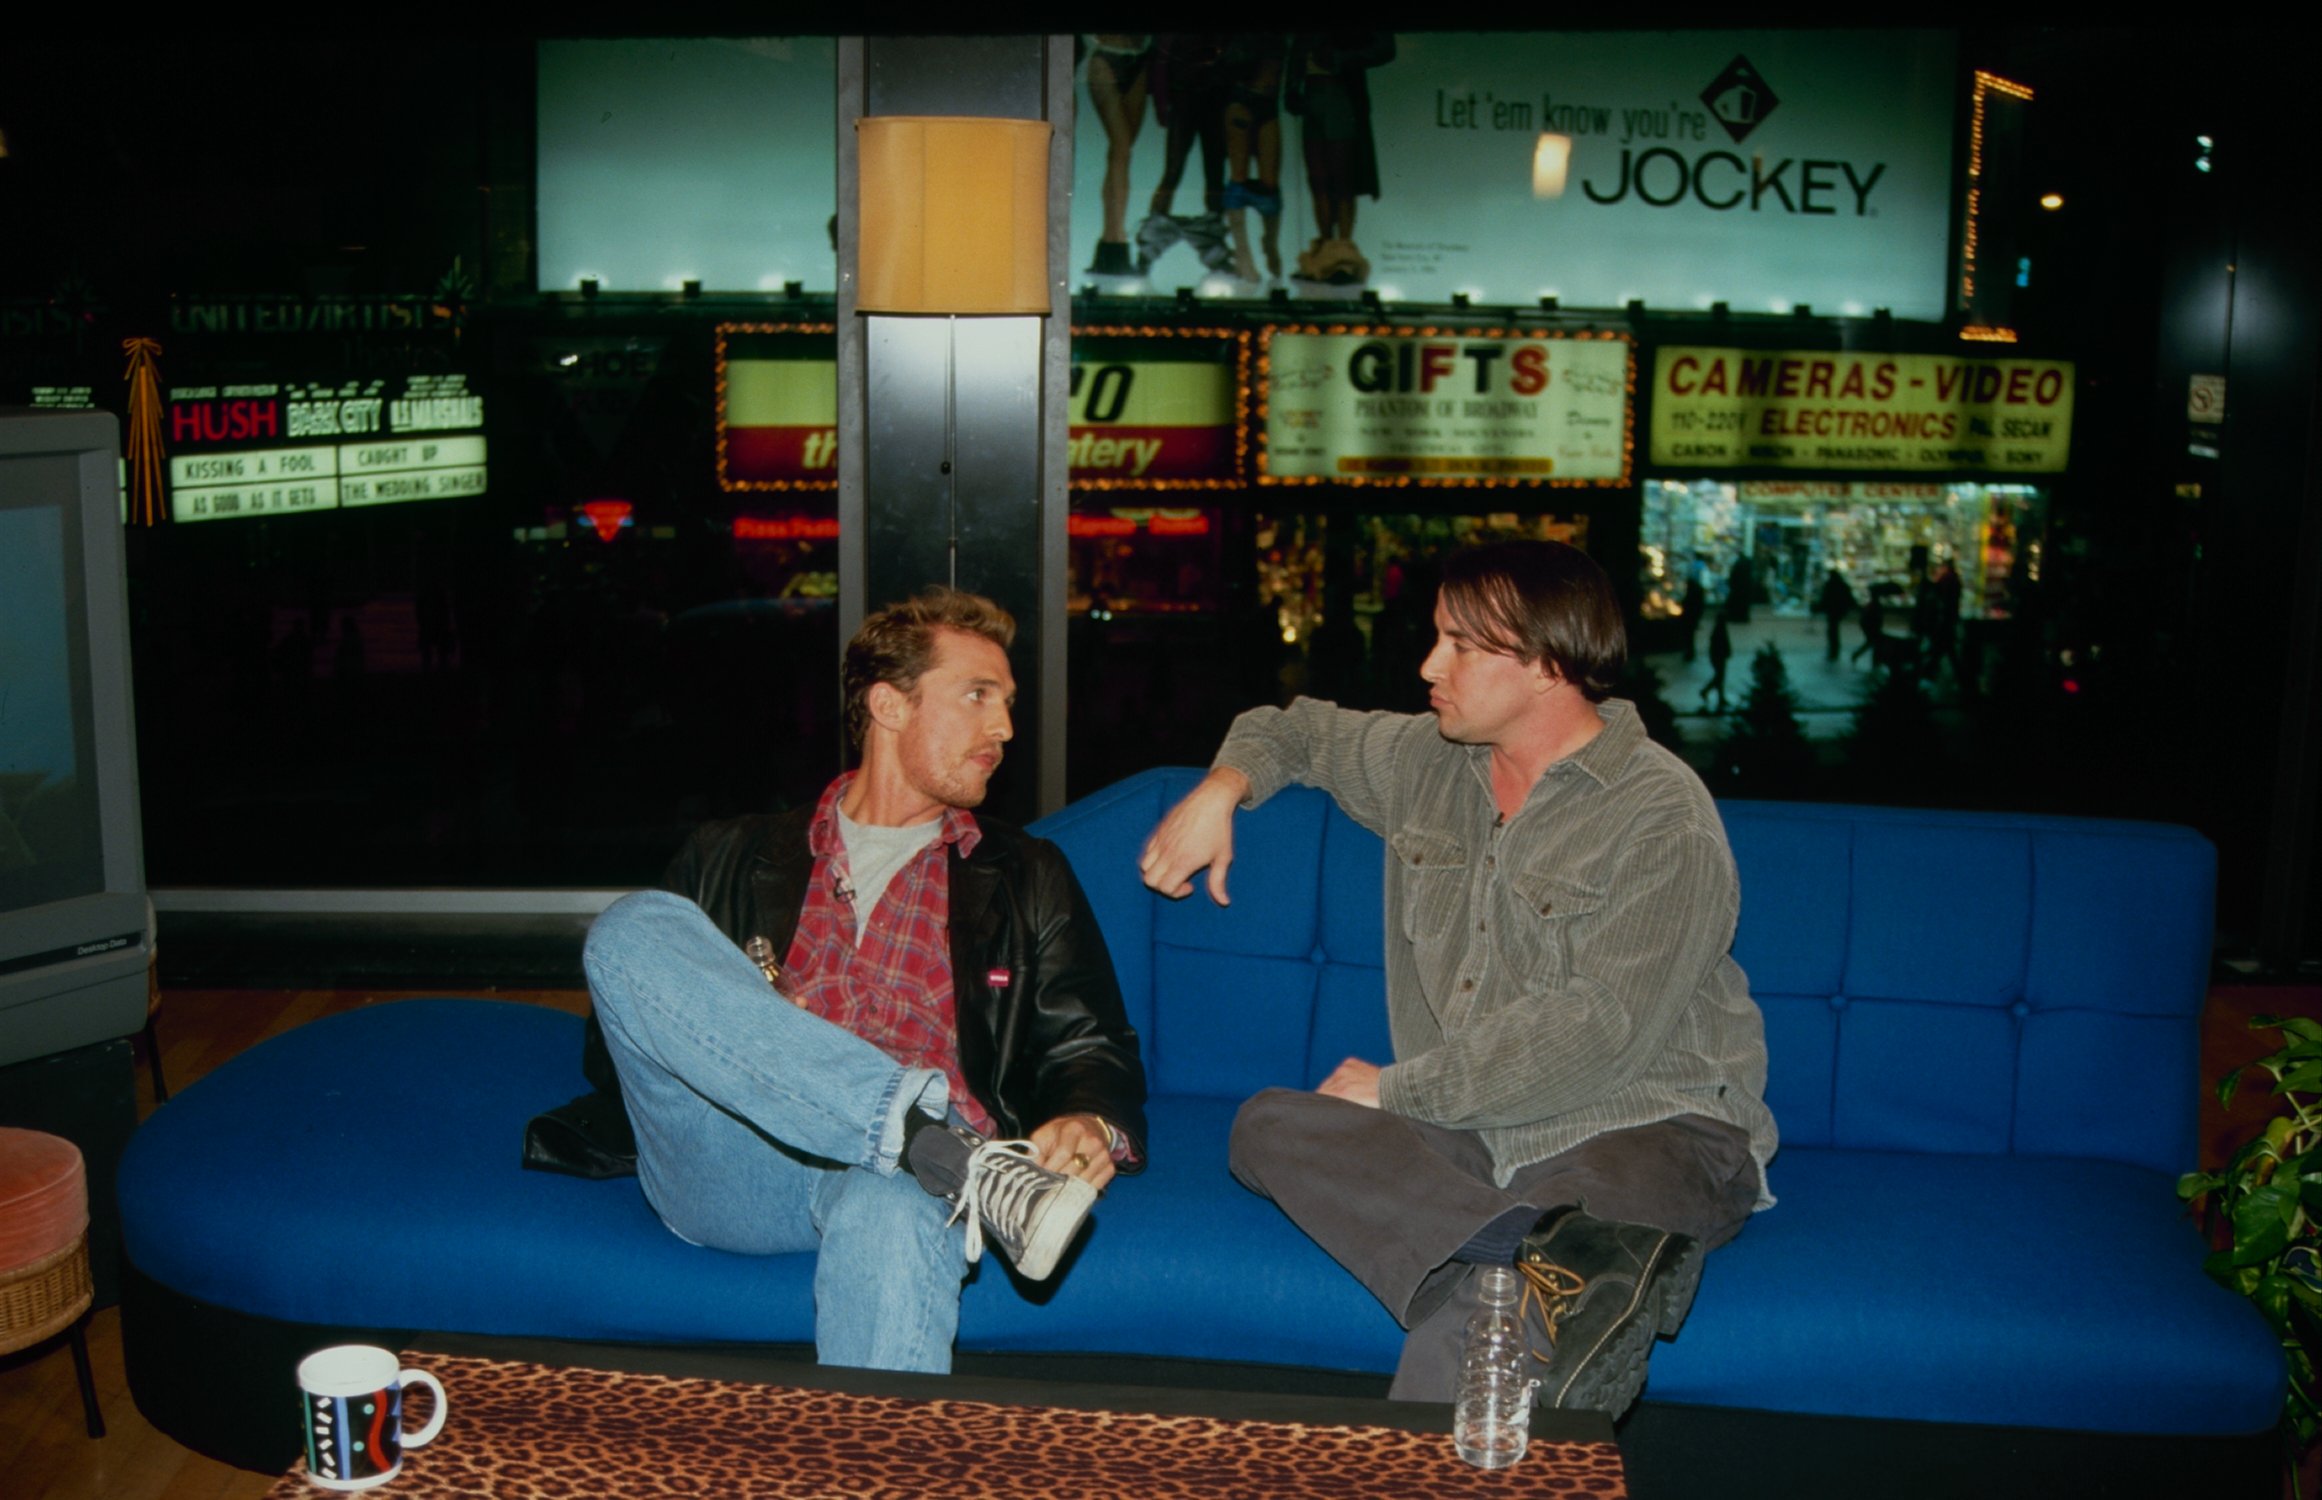 Dazed and Confused director Ricahrd Linklater and Matthew McConaughey sitting on a couch